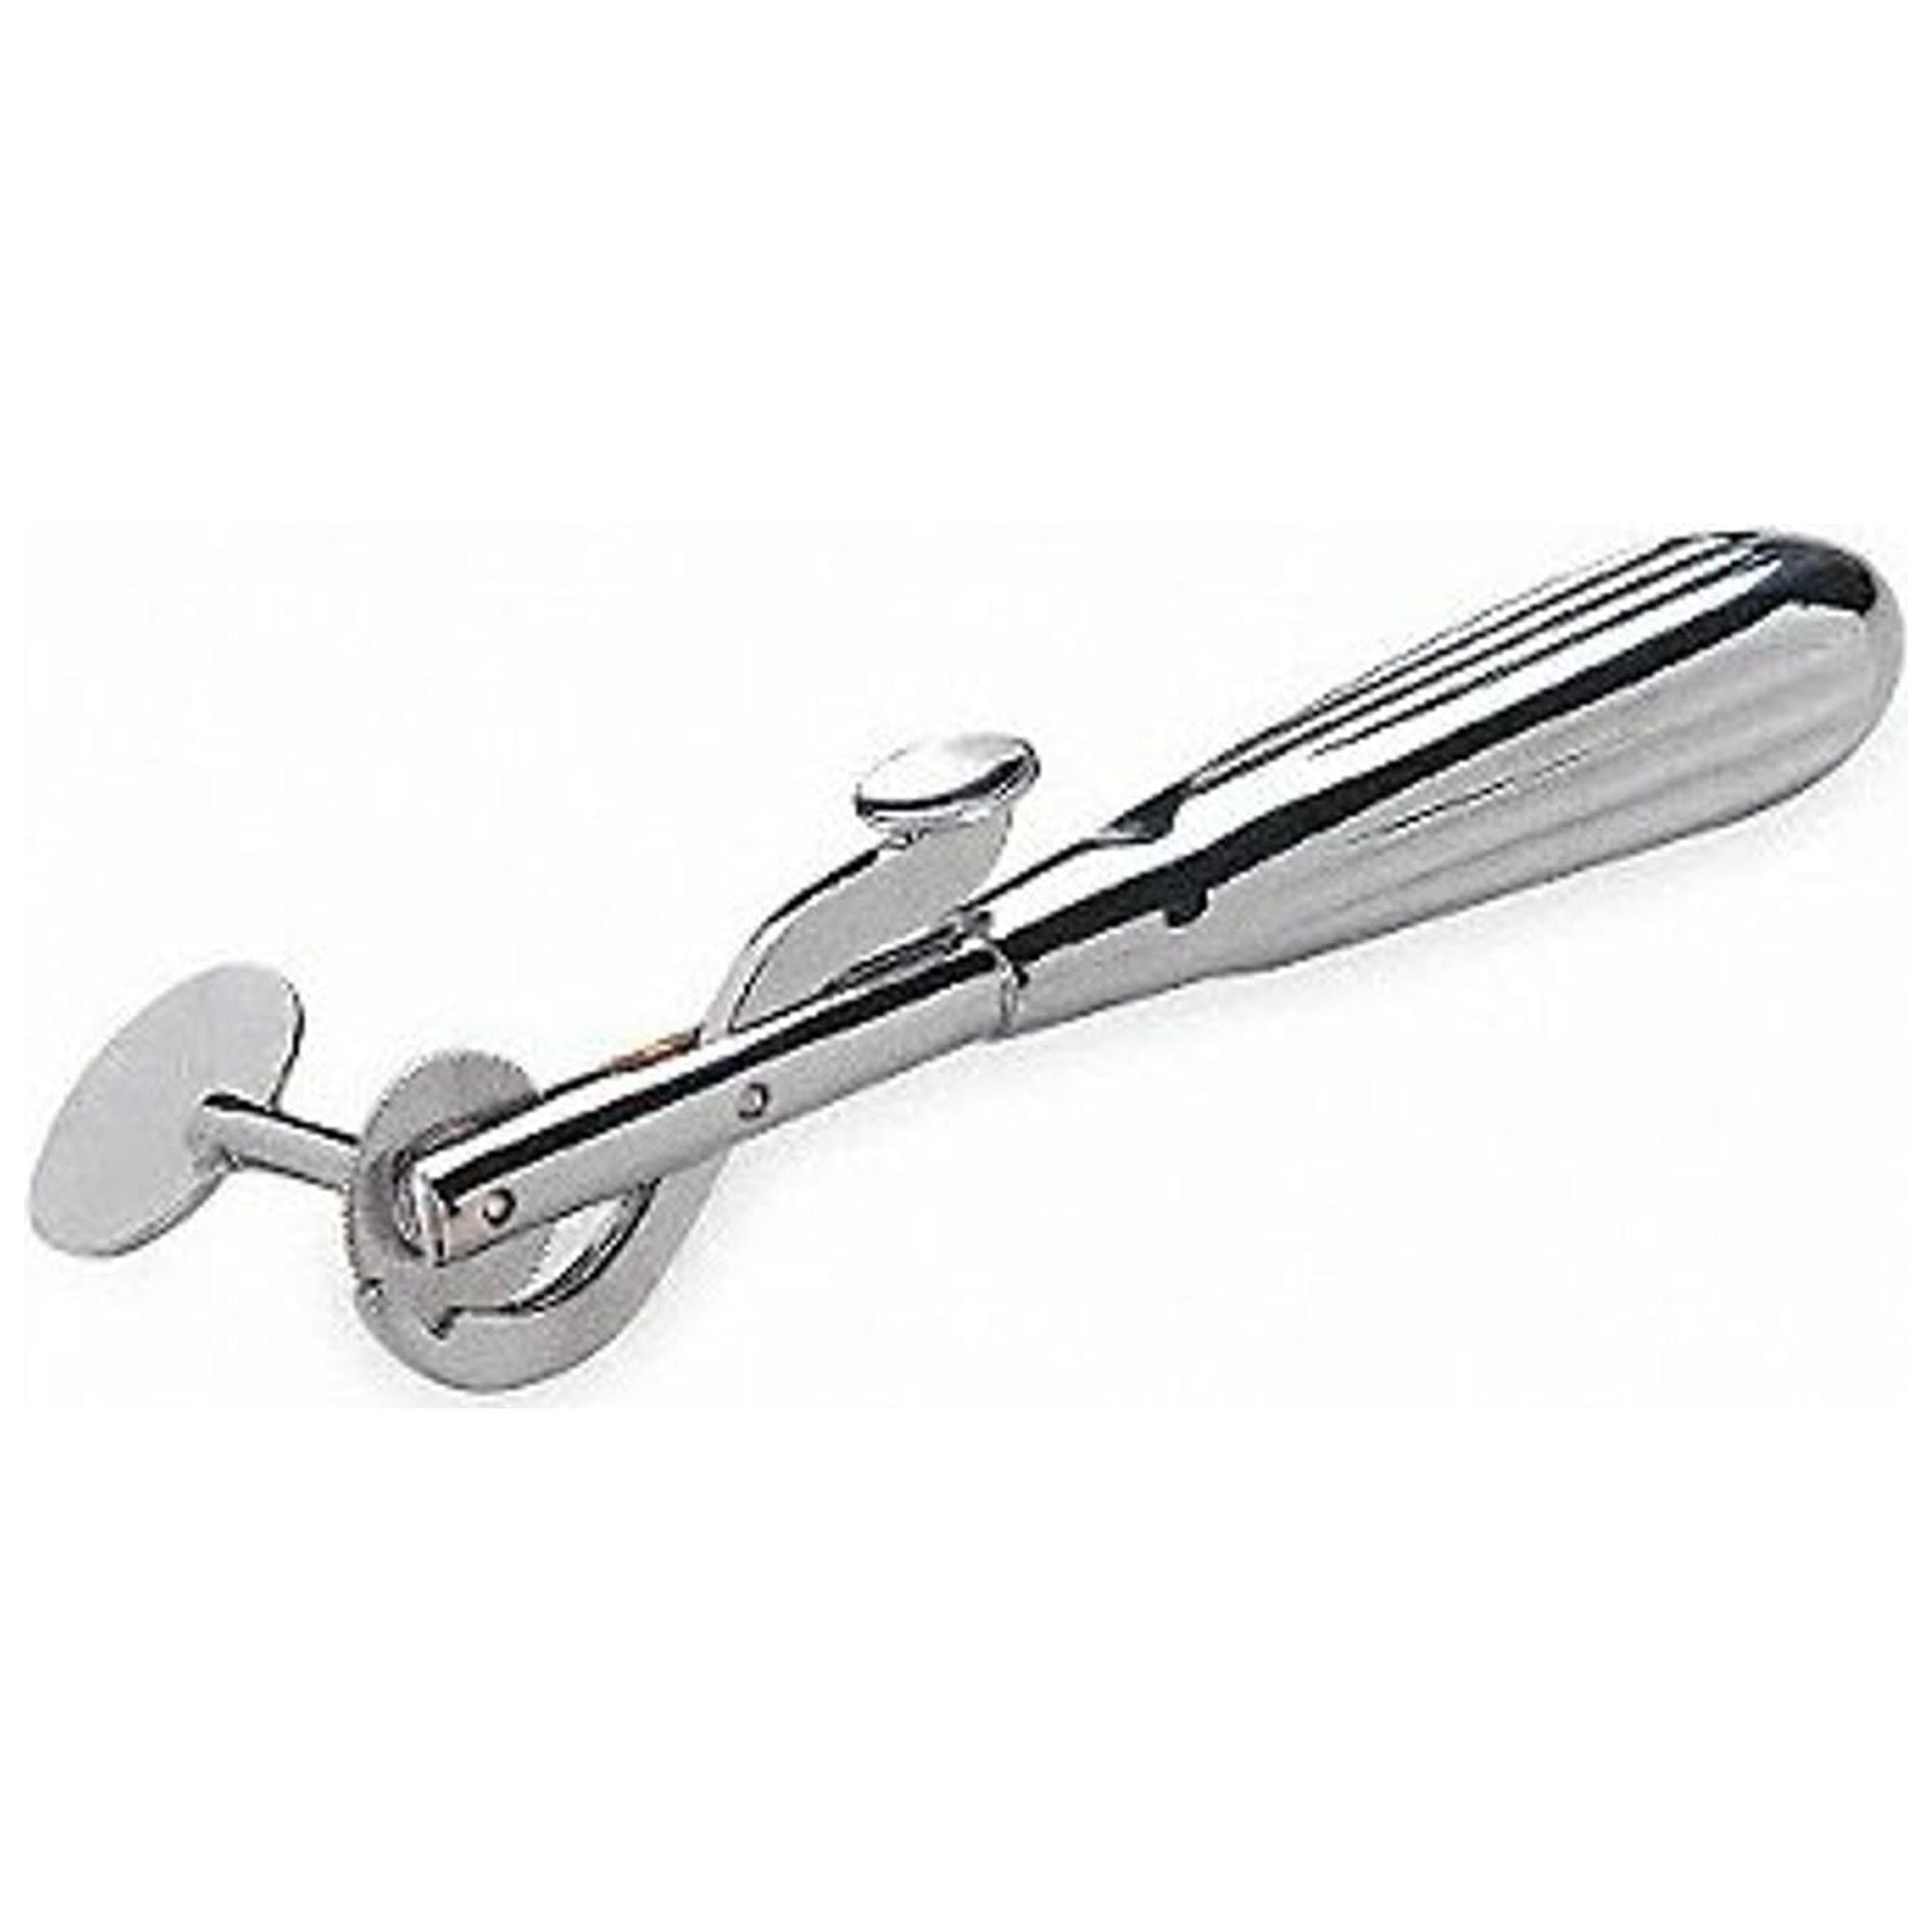 First Aid Only Ring Cutter, 2 in, Stainless Steel - M5118